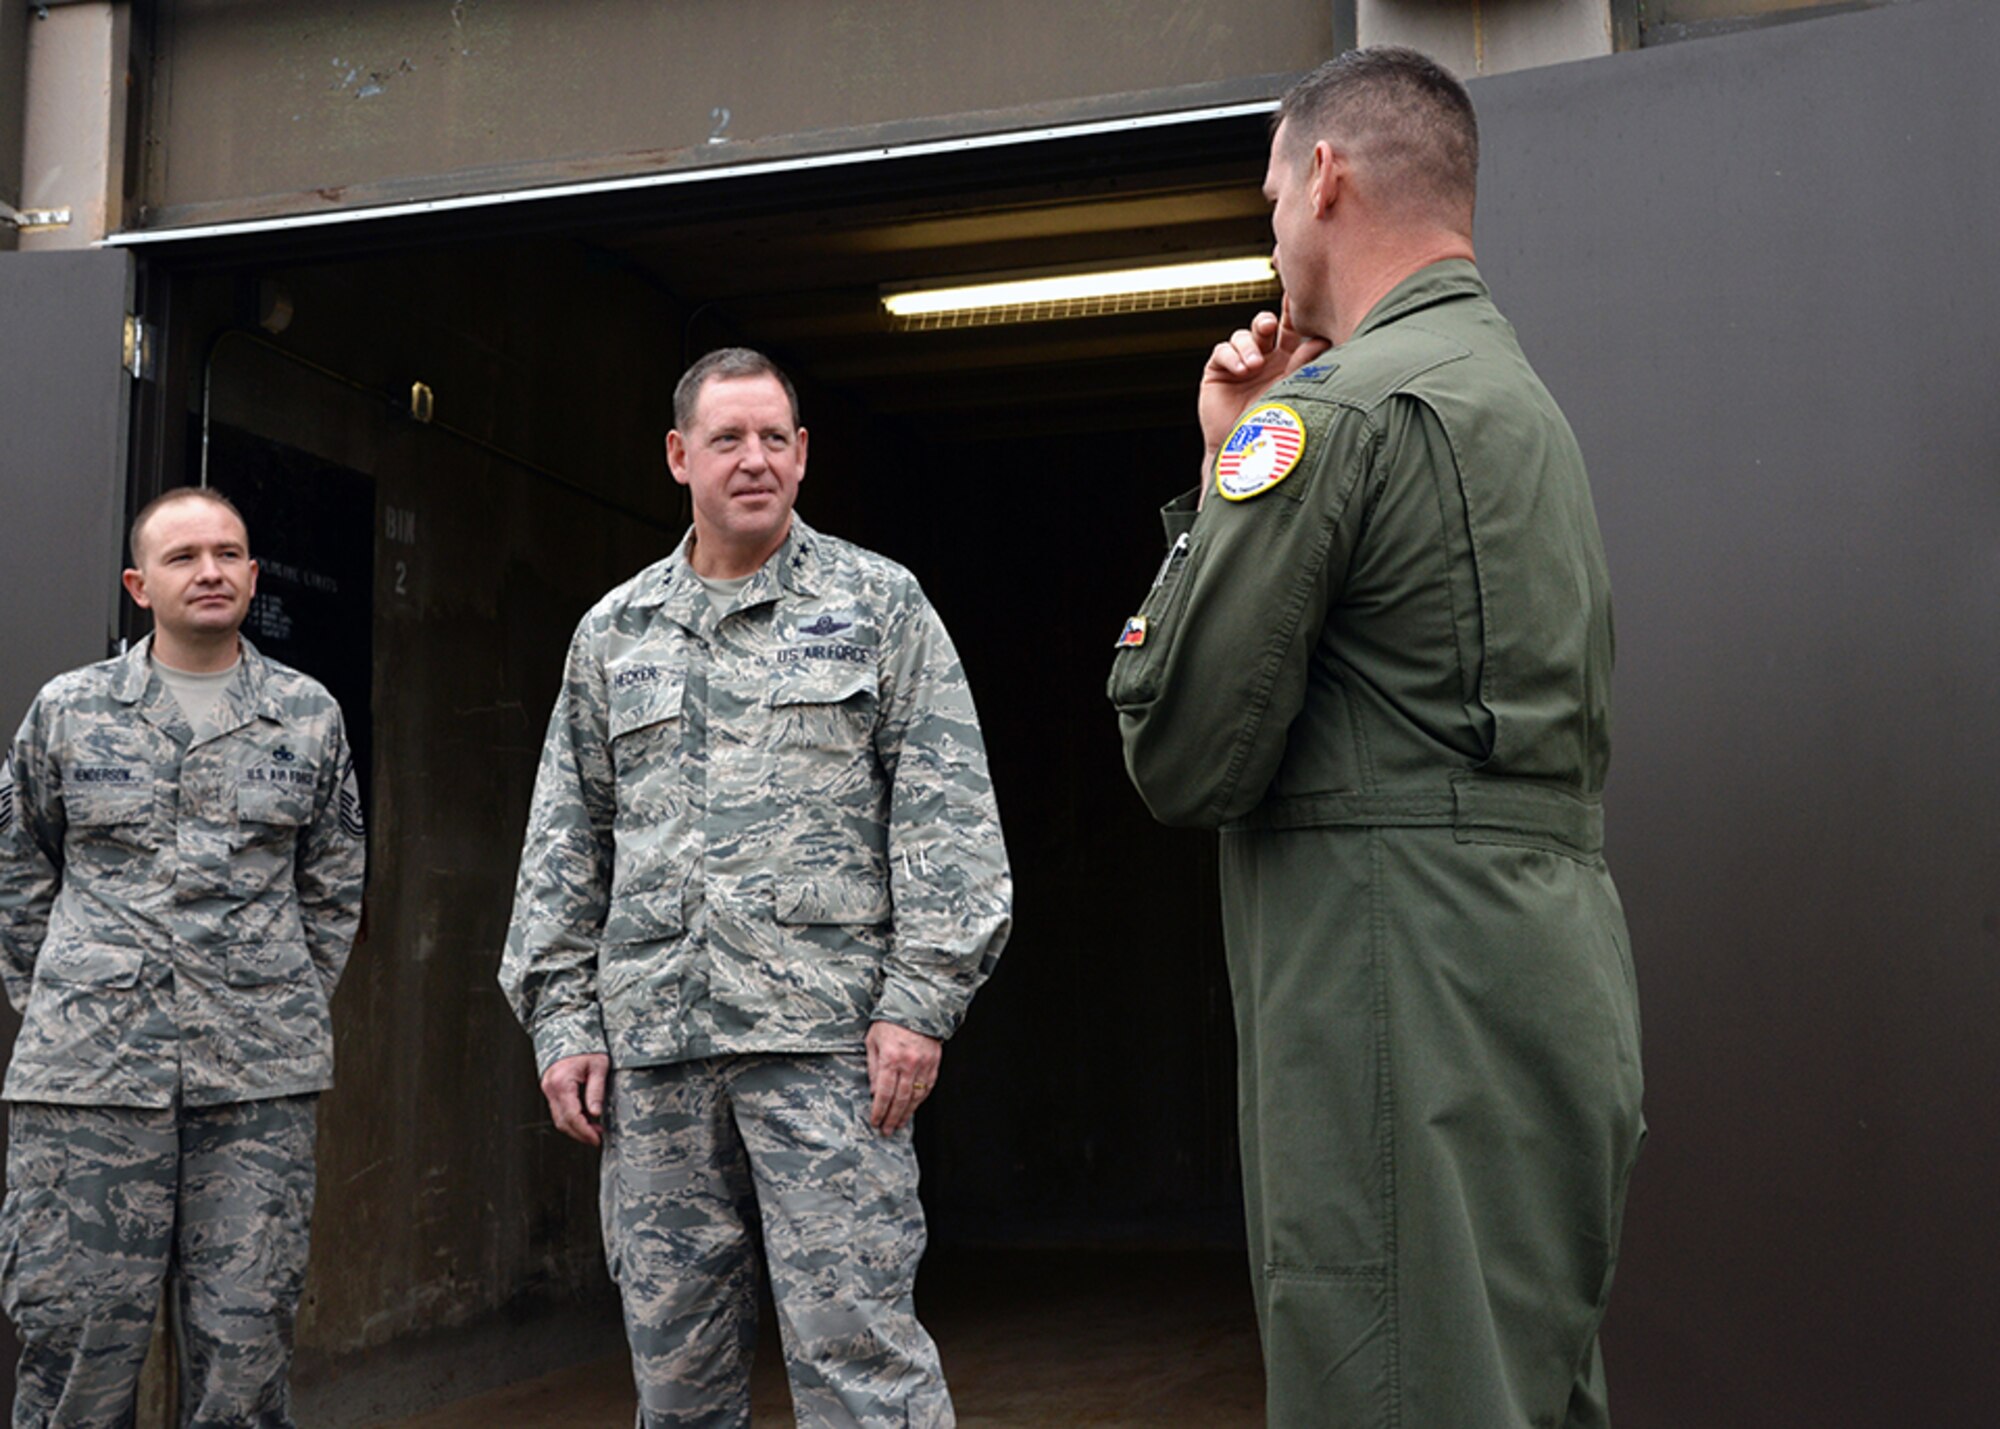 Maj. Gen. James Hecker, 19th Air Force commander, talks to Col. Bradly Glenn, Air National Guard advisor to Air Education Training Command, and Senior Master Sgt. Toby Henderson, the 149th Fighter Wing’s munitions flight chief, Dec. 10, during his visit to Joint Base San Antonio-Lackland, Texas. 

